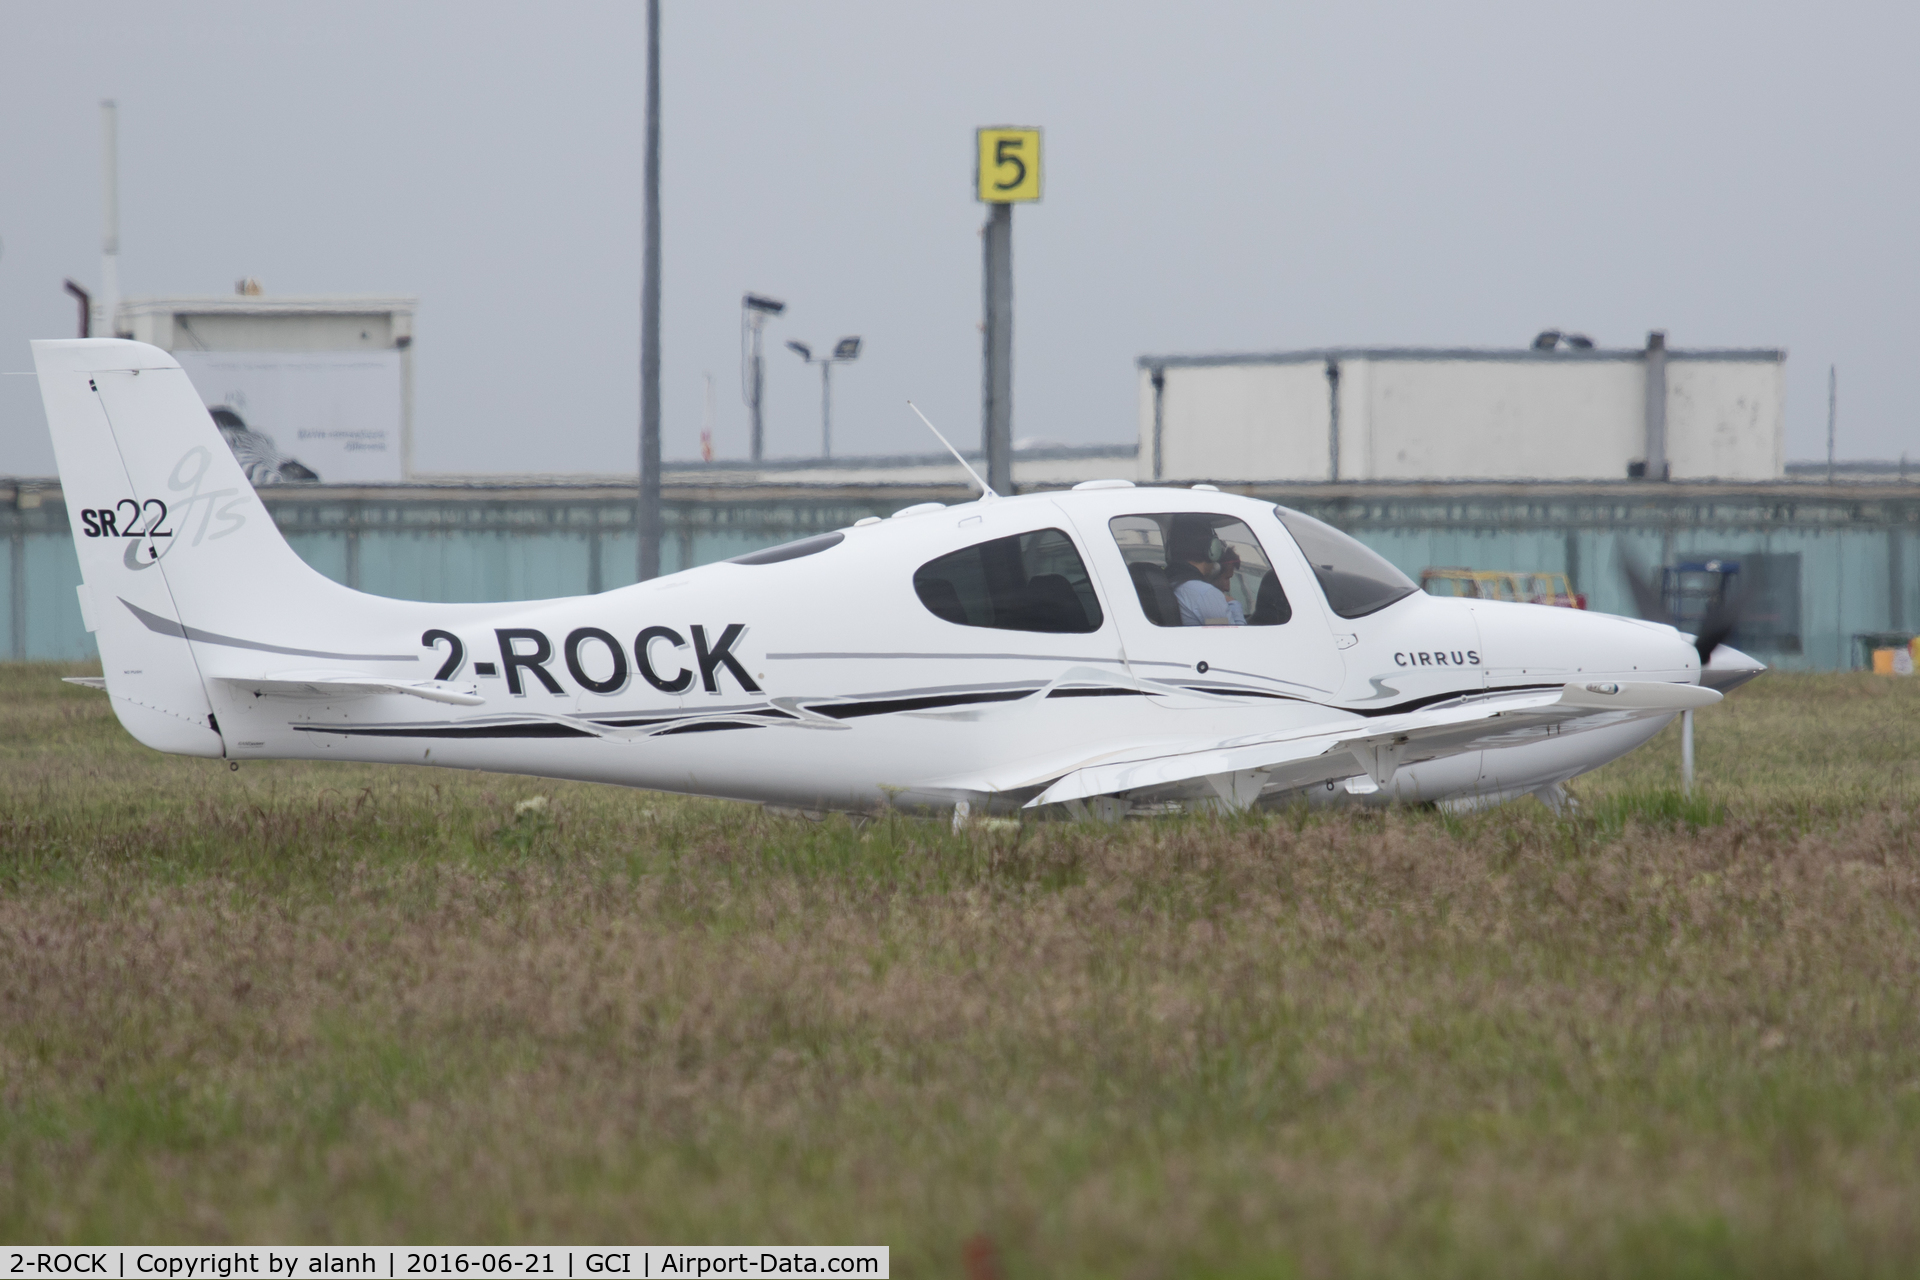 2-ROCK, 2005 Cirrus SR22 GTS C/N 1313, Lined up ready for a 27 departure - shame about the long grass...